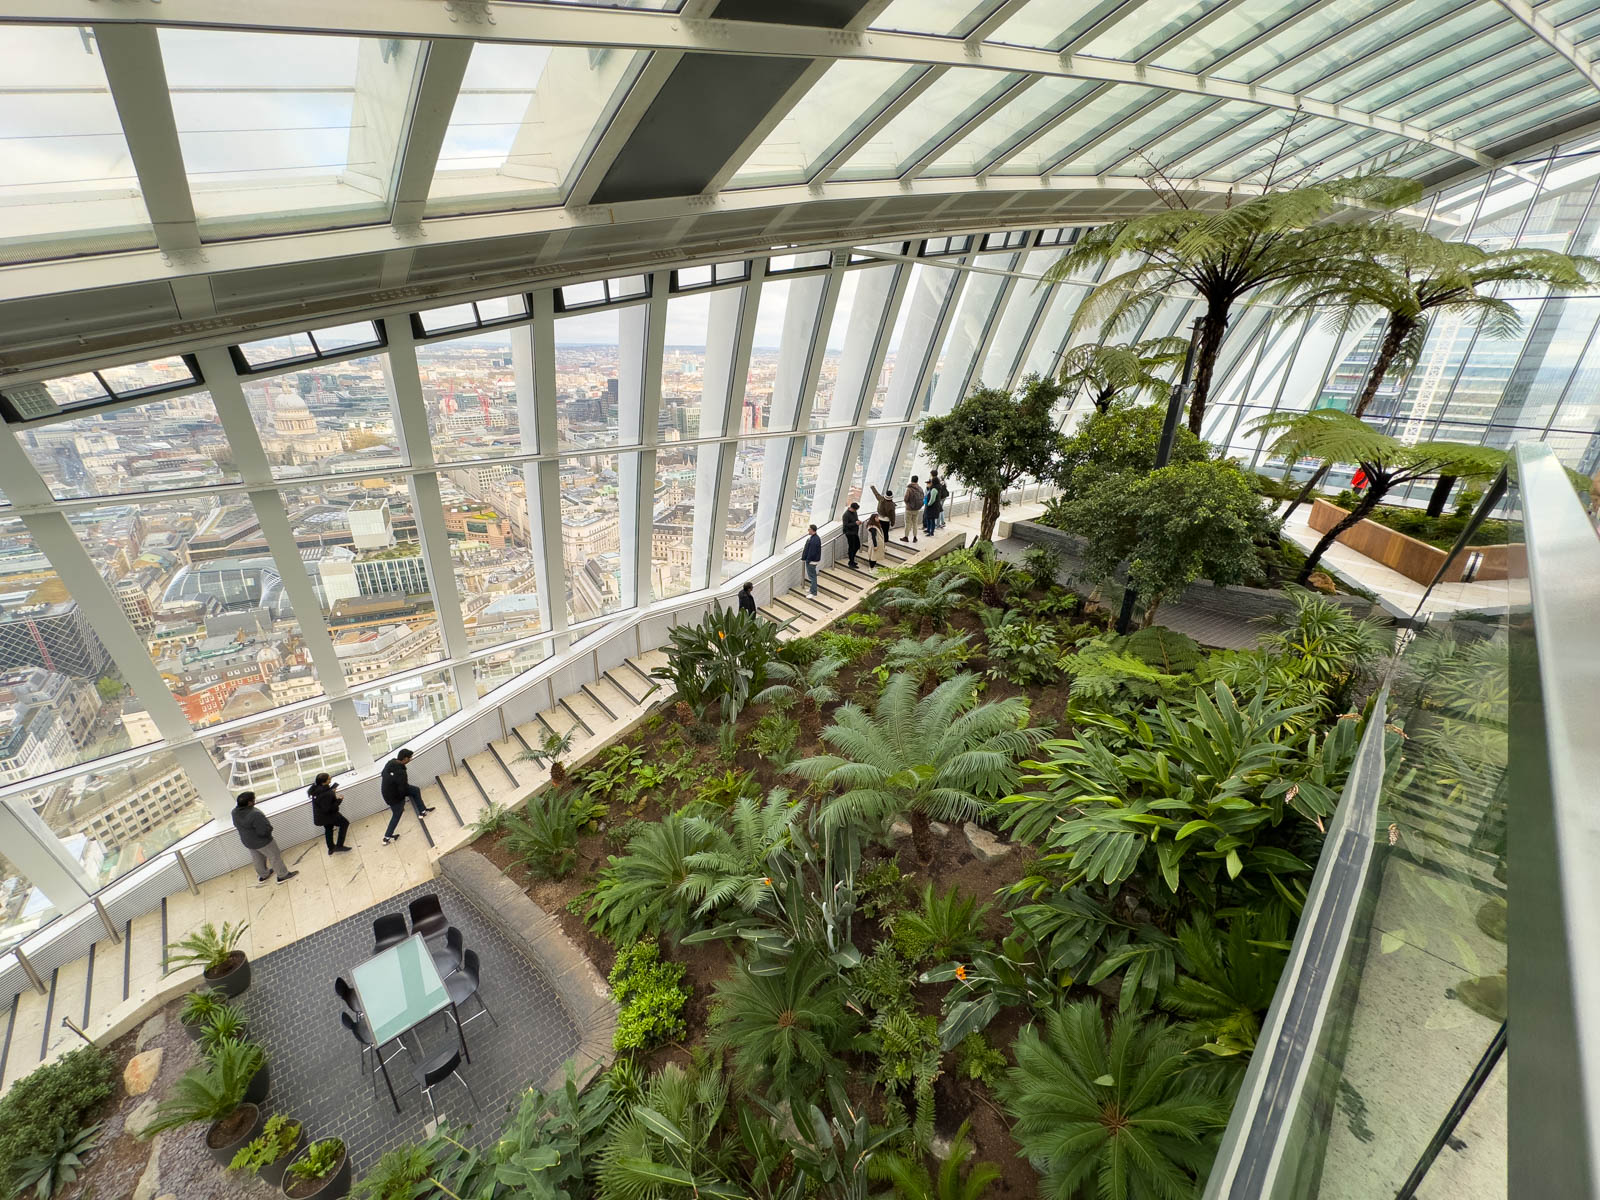 Tourists walking along the indoor garden near a wall of windows that look out at London.